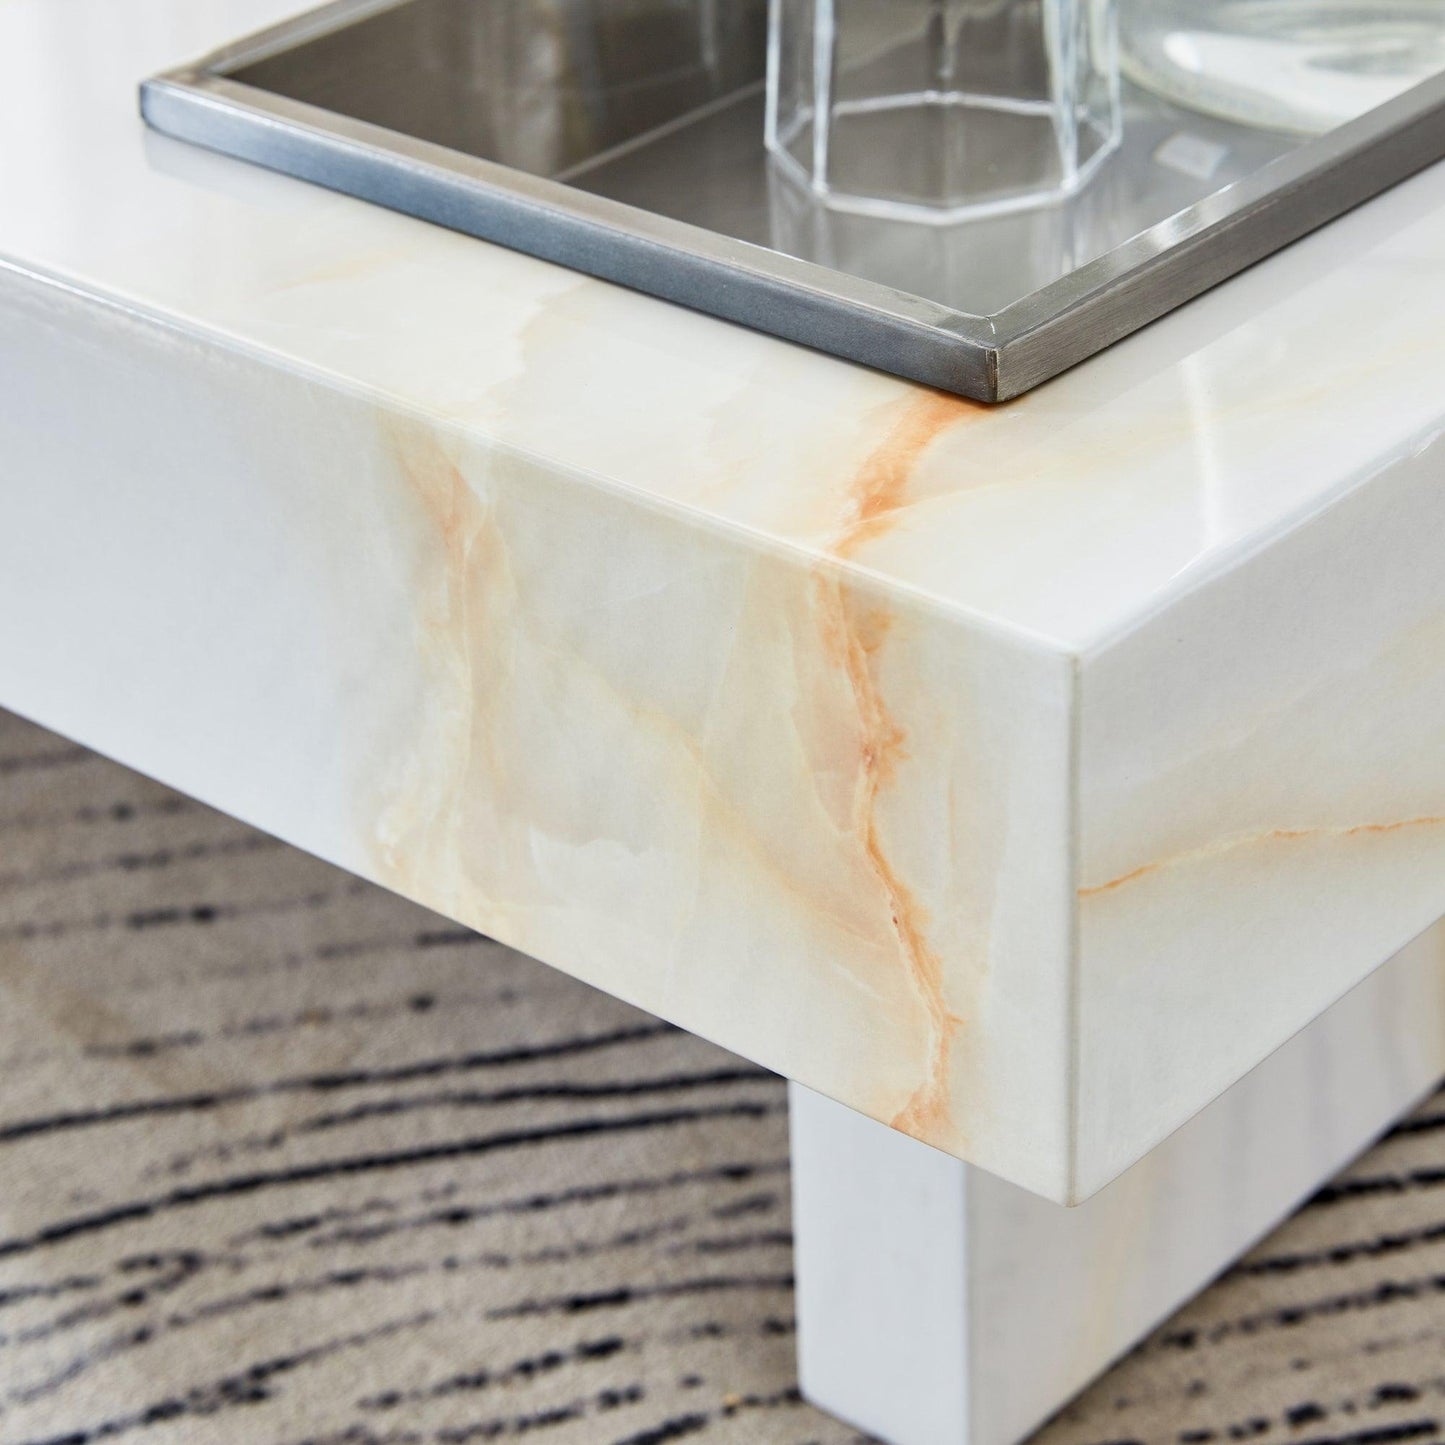 A modern and practical coffee table with imitation marble patterns made of MDF material - FurniFindUSA